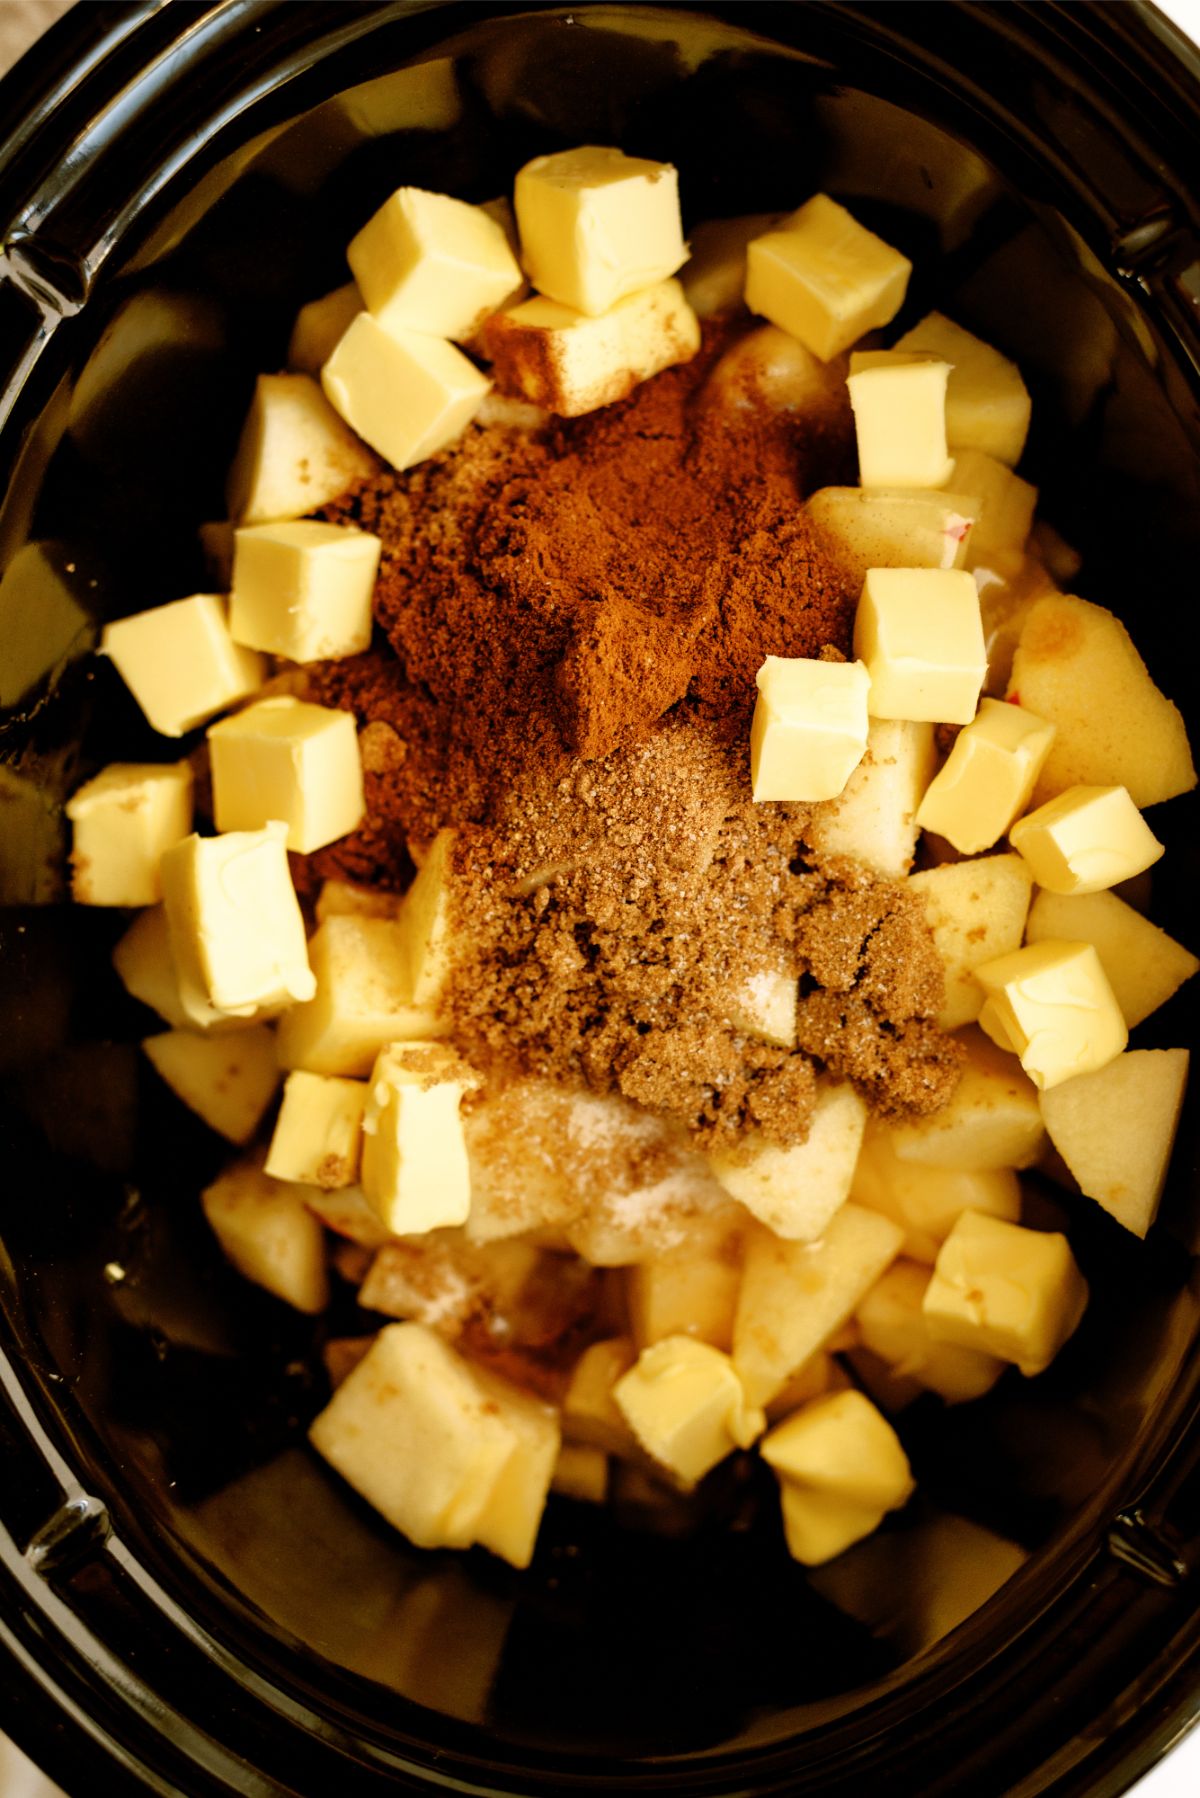 Cubed apples in the slow cooker with seasonings on top